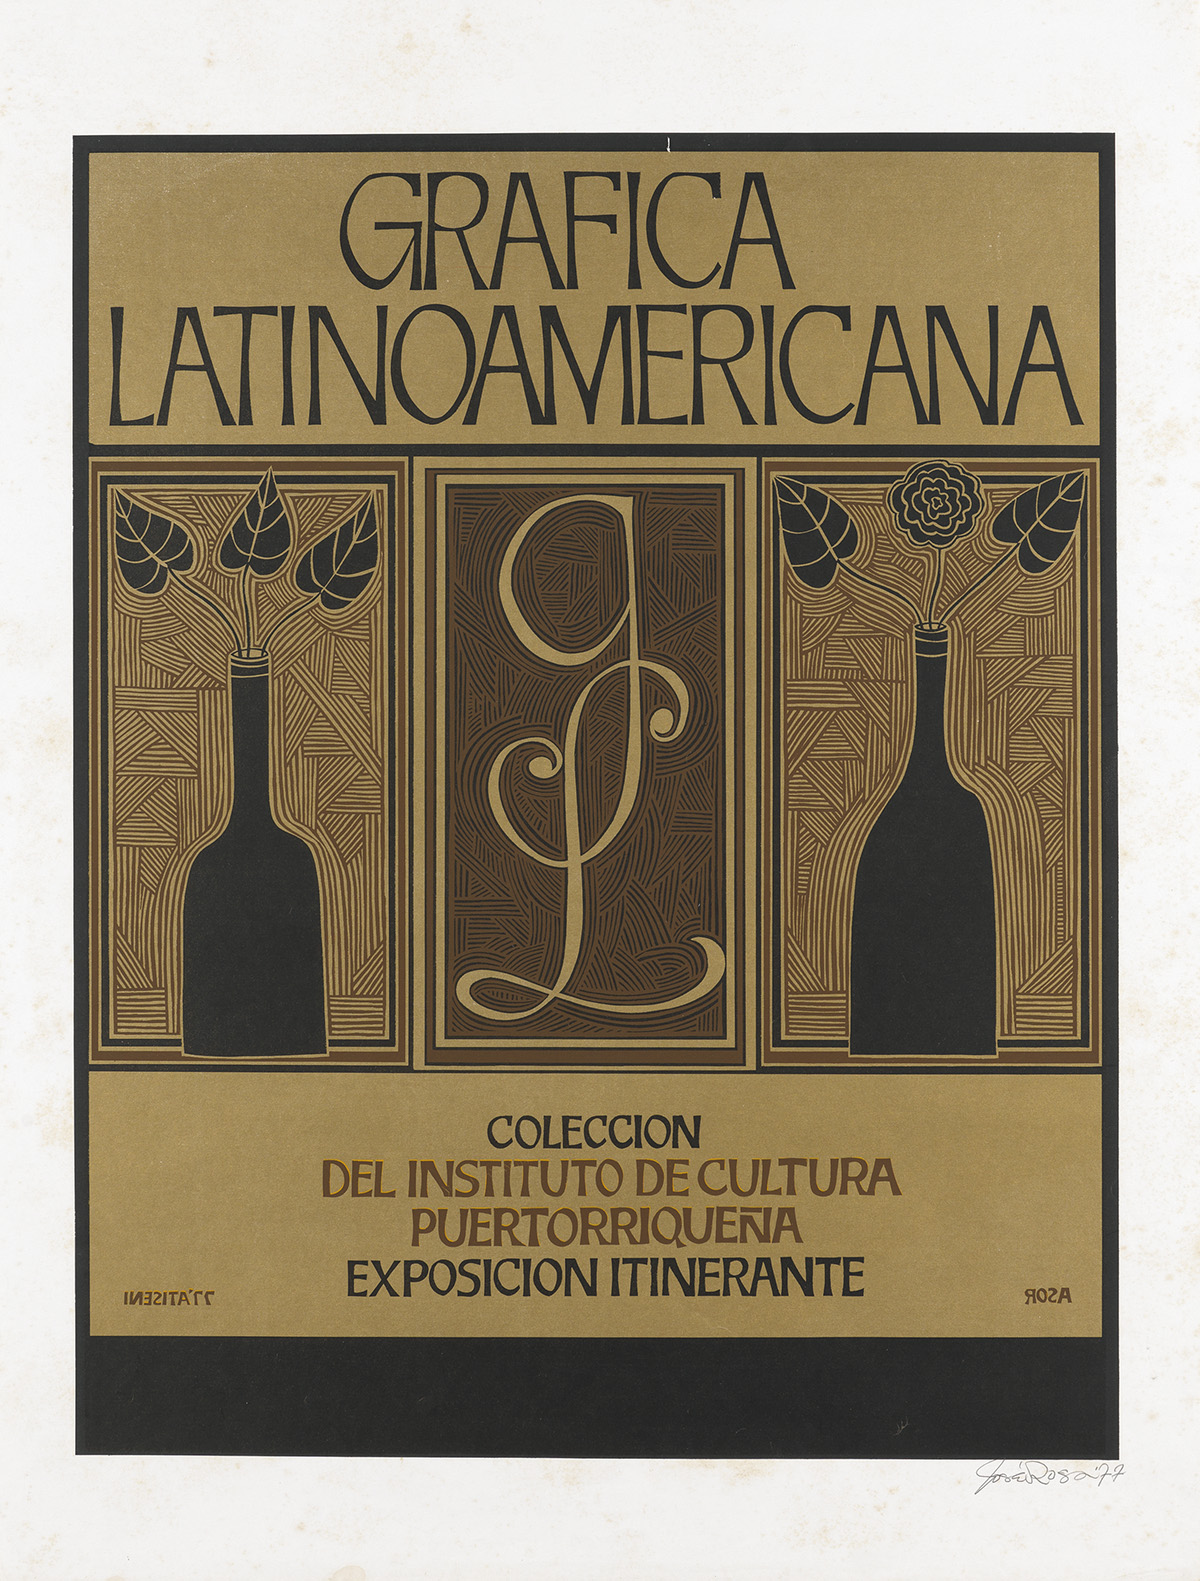 VARIOUS ARTISTS. [PUERTO RICAN GRAPHIC DESIGN.] Collection of over 350 posters, including prints and serigraphs. 1960-2013. Sizes vary.